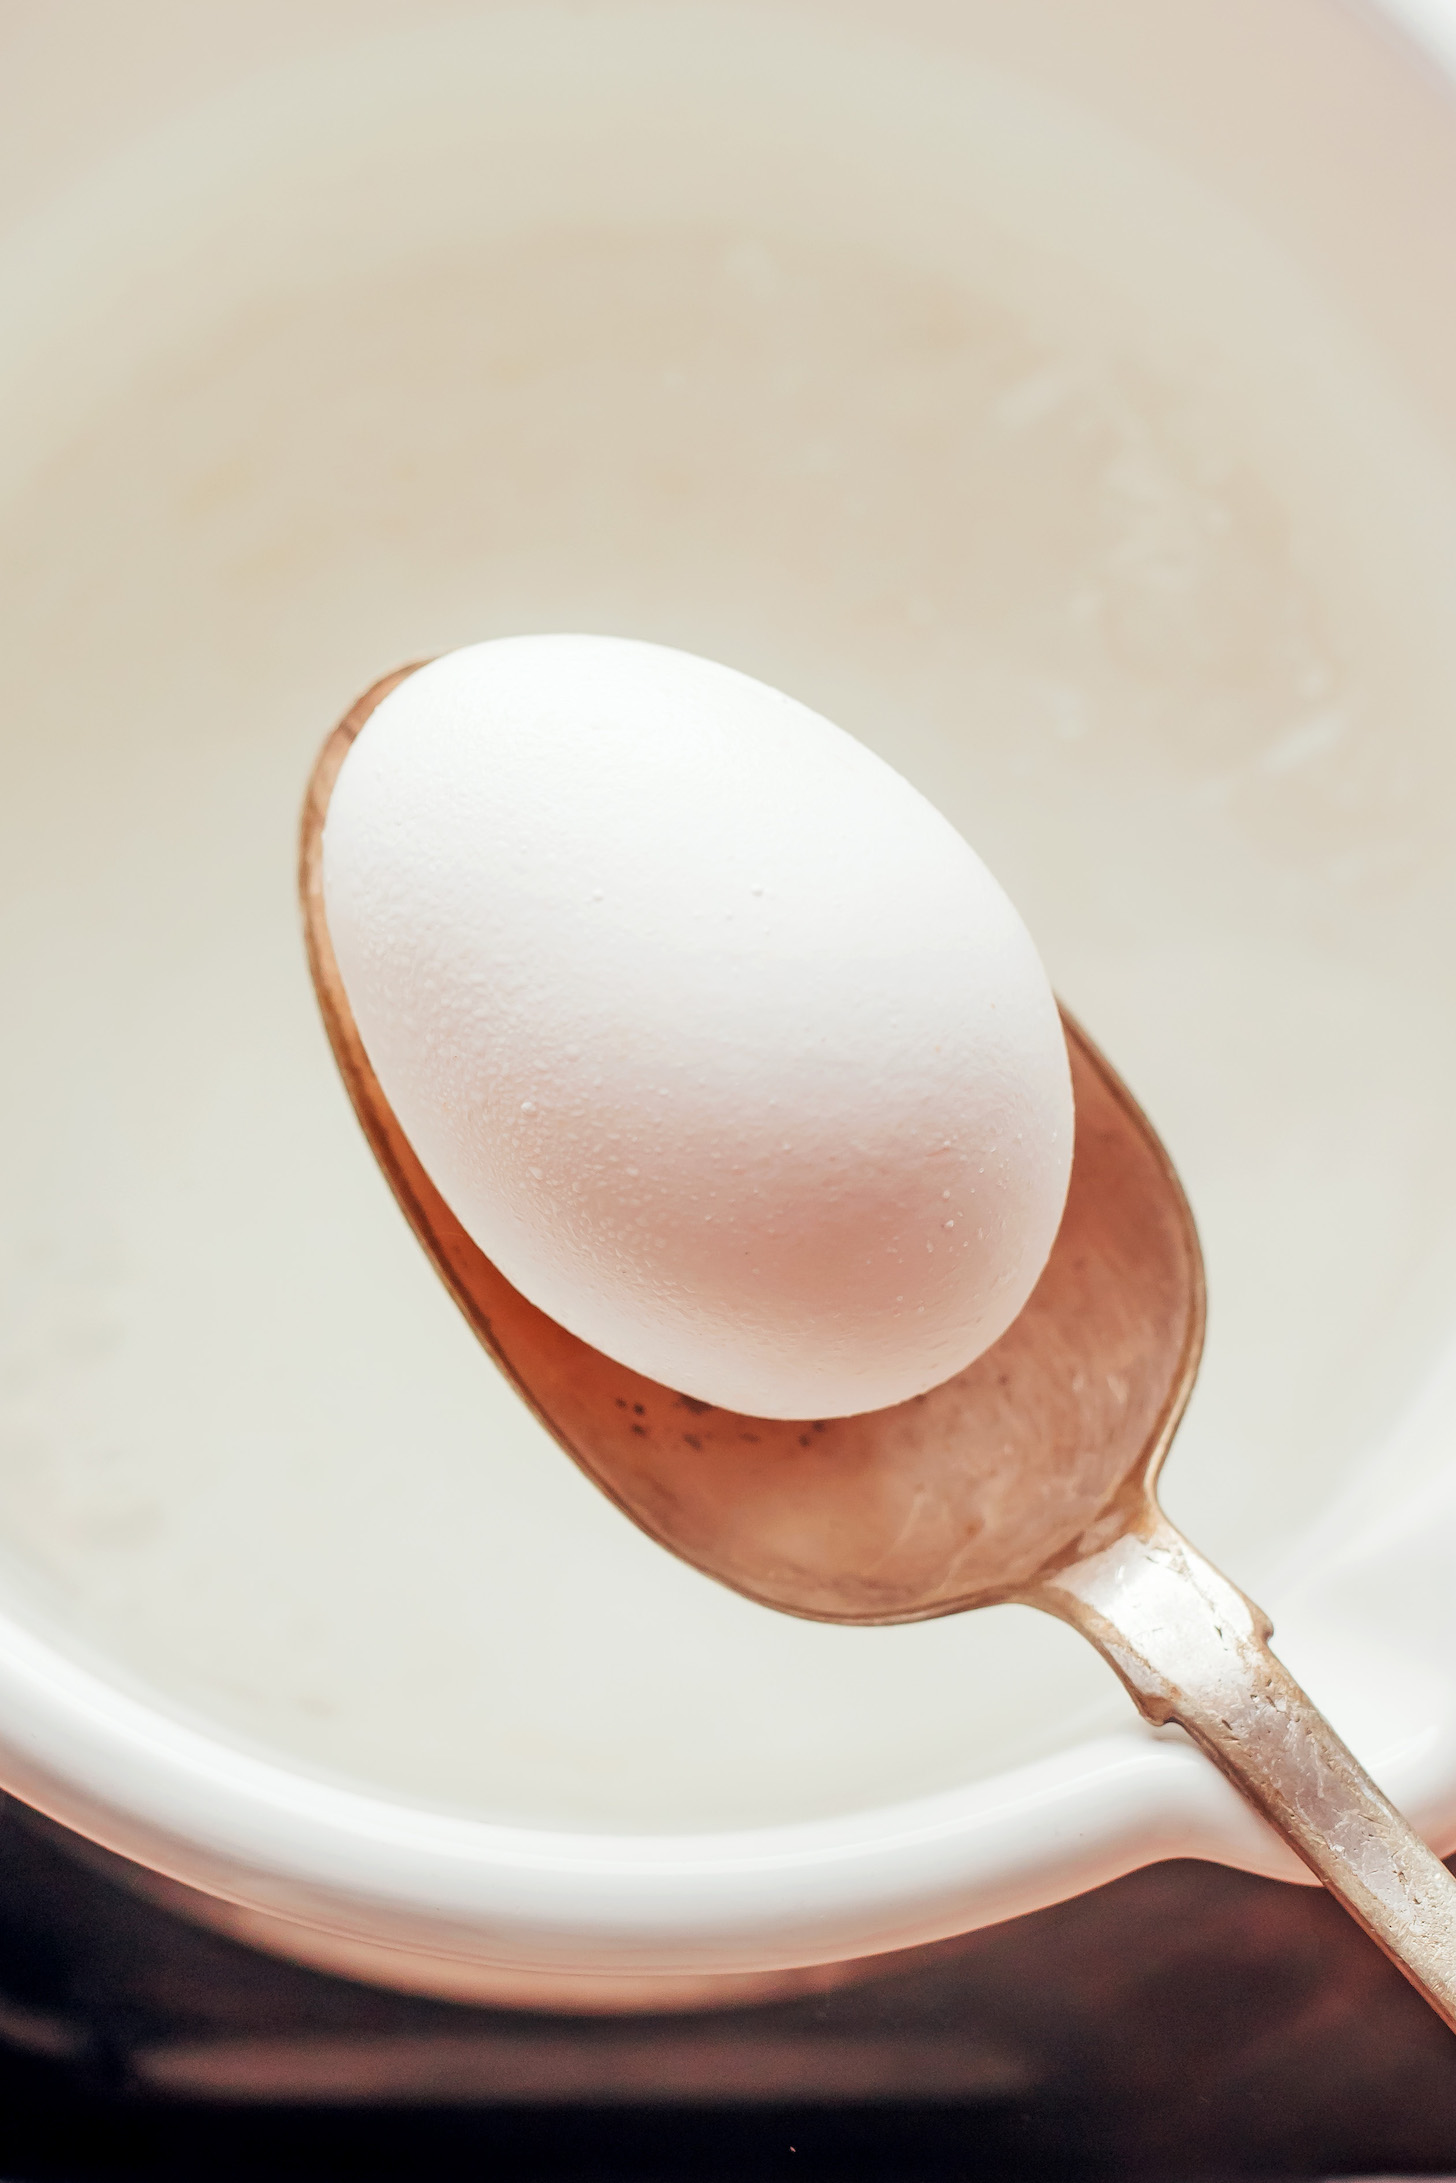 Using a spoon to lower an egg into a pot of water